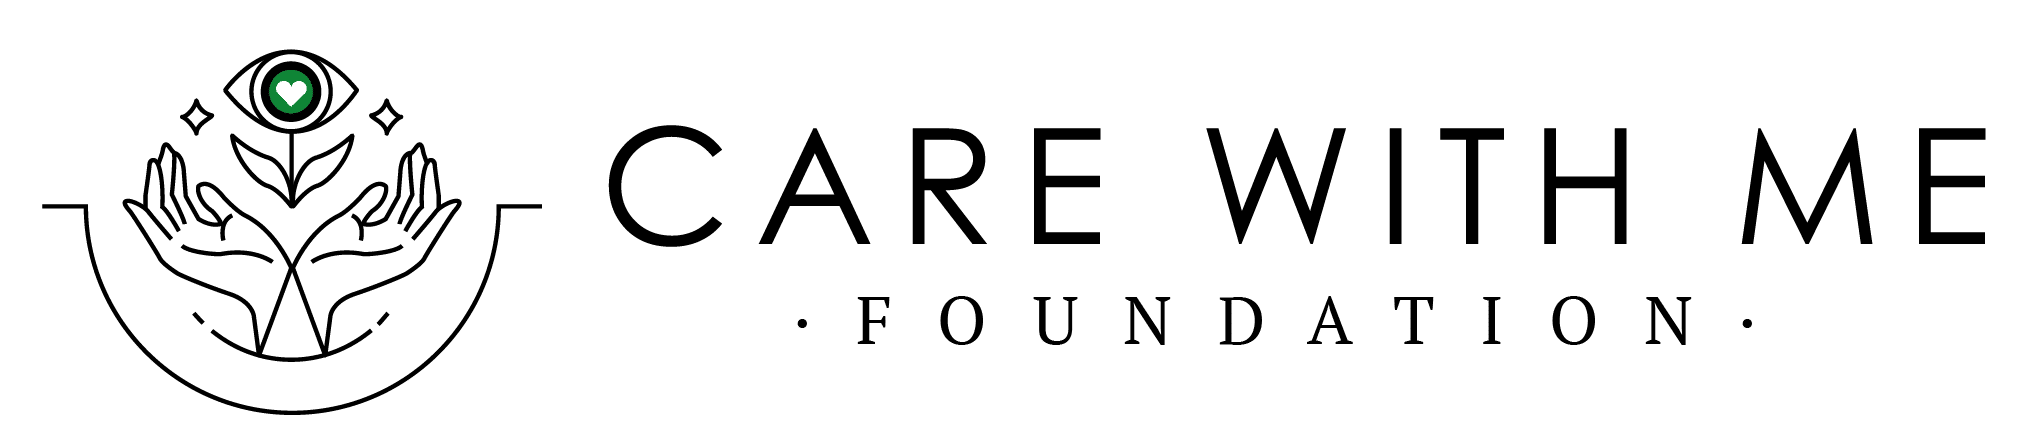 CARE WITH ME FOUNDATION LOGO-03